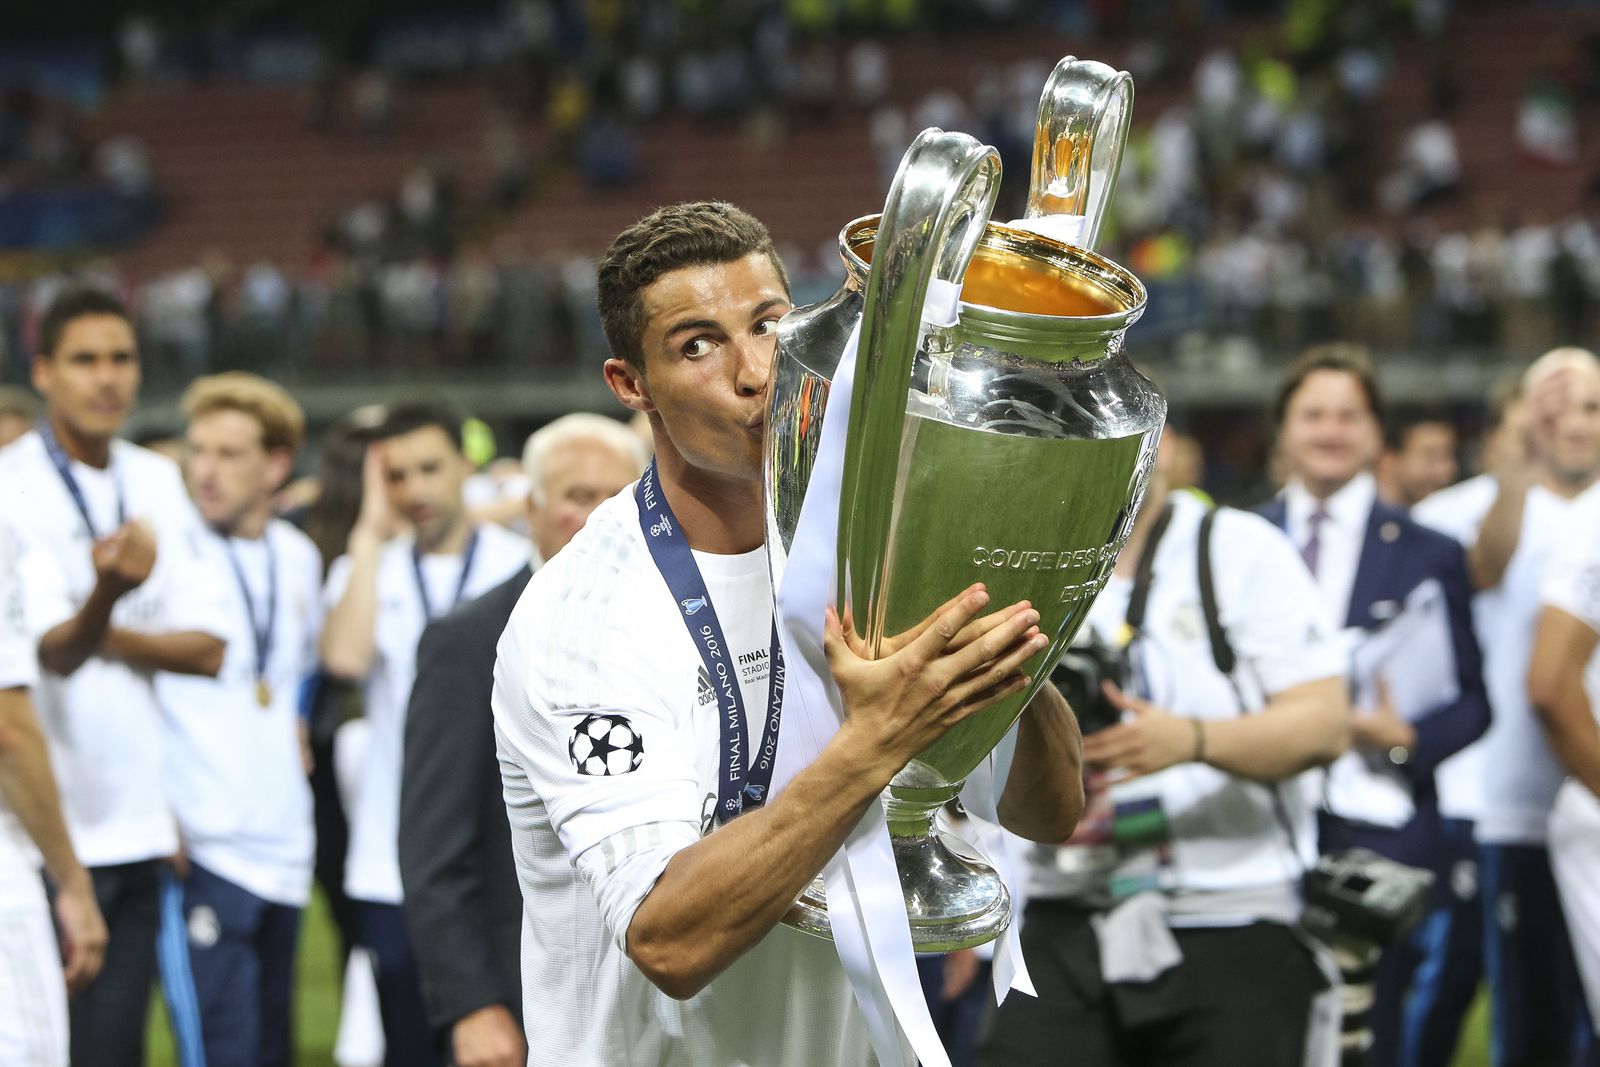 Cristiano Ronaldo kisses the Champions League trophy. Again, I was at the wrong end for both goals but some nice celes at the end made up for it. (105mm, ISO3200, 1/1250th, f3.5)